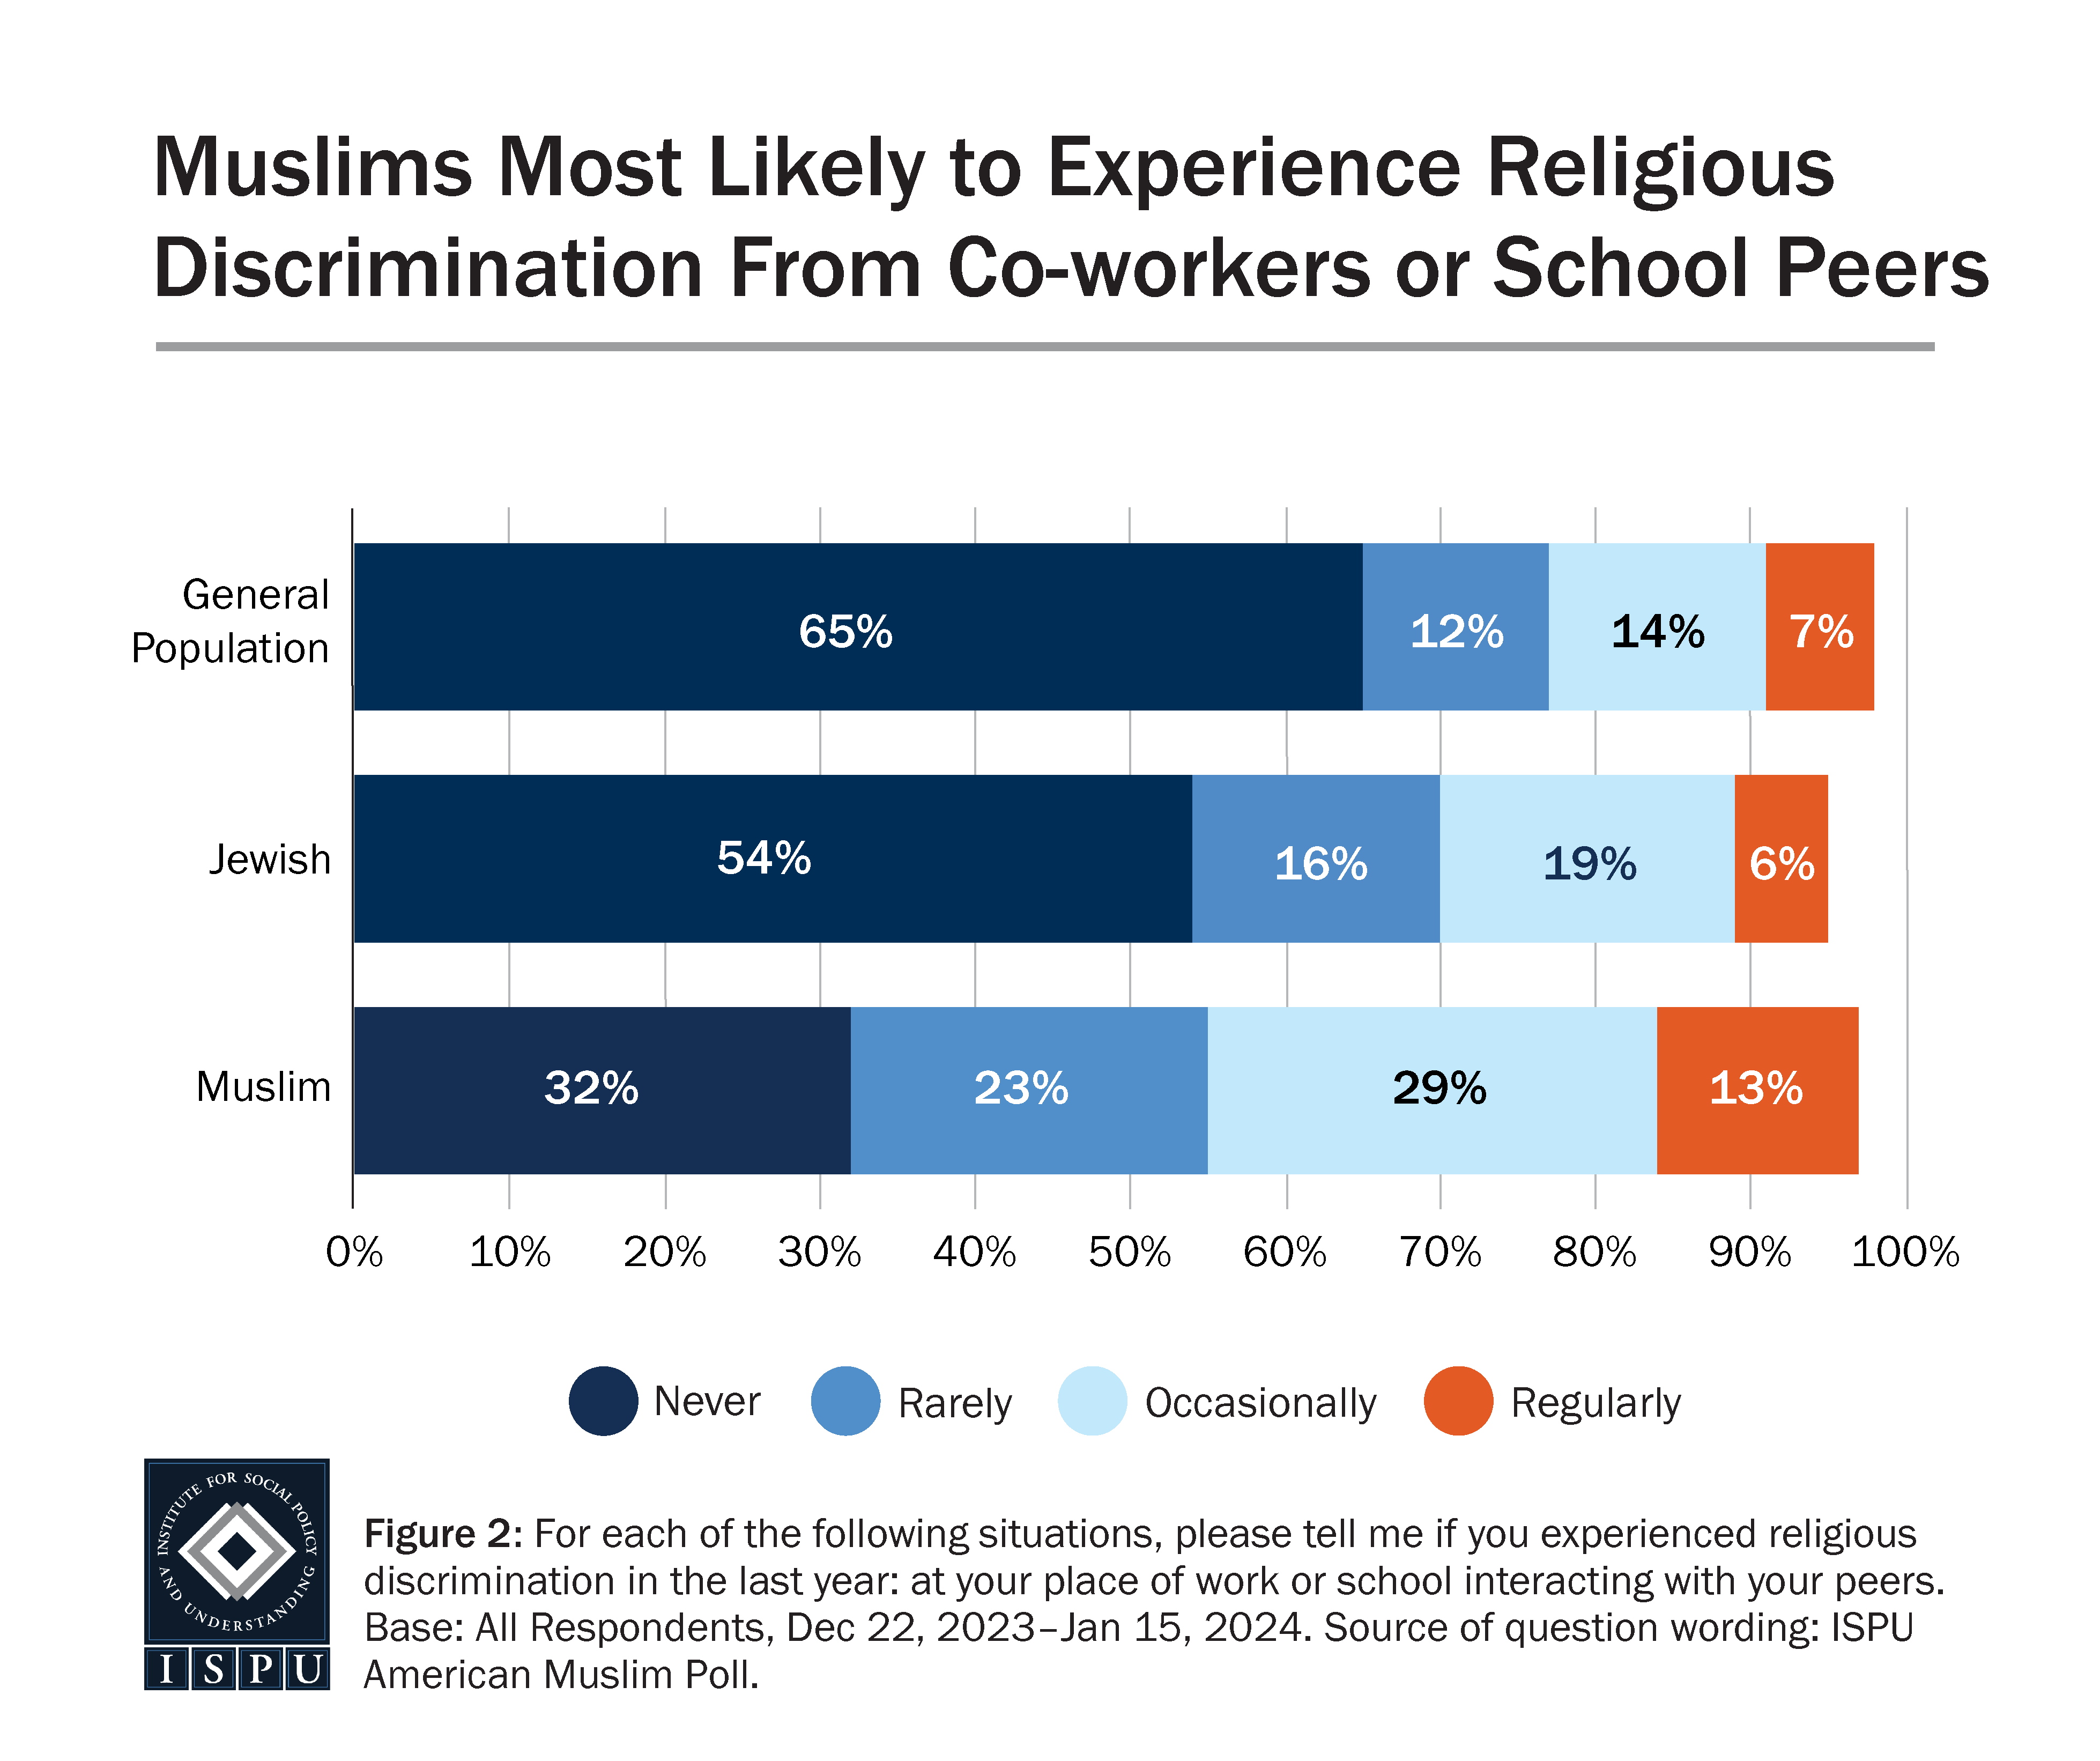 A bar graph showing the frequency of religious discrimination experienced by the general population, Jews, and Muslims at work or school when interacting with peers.